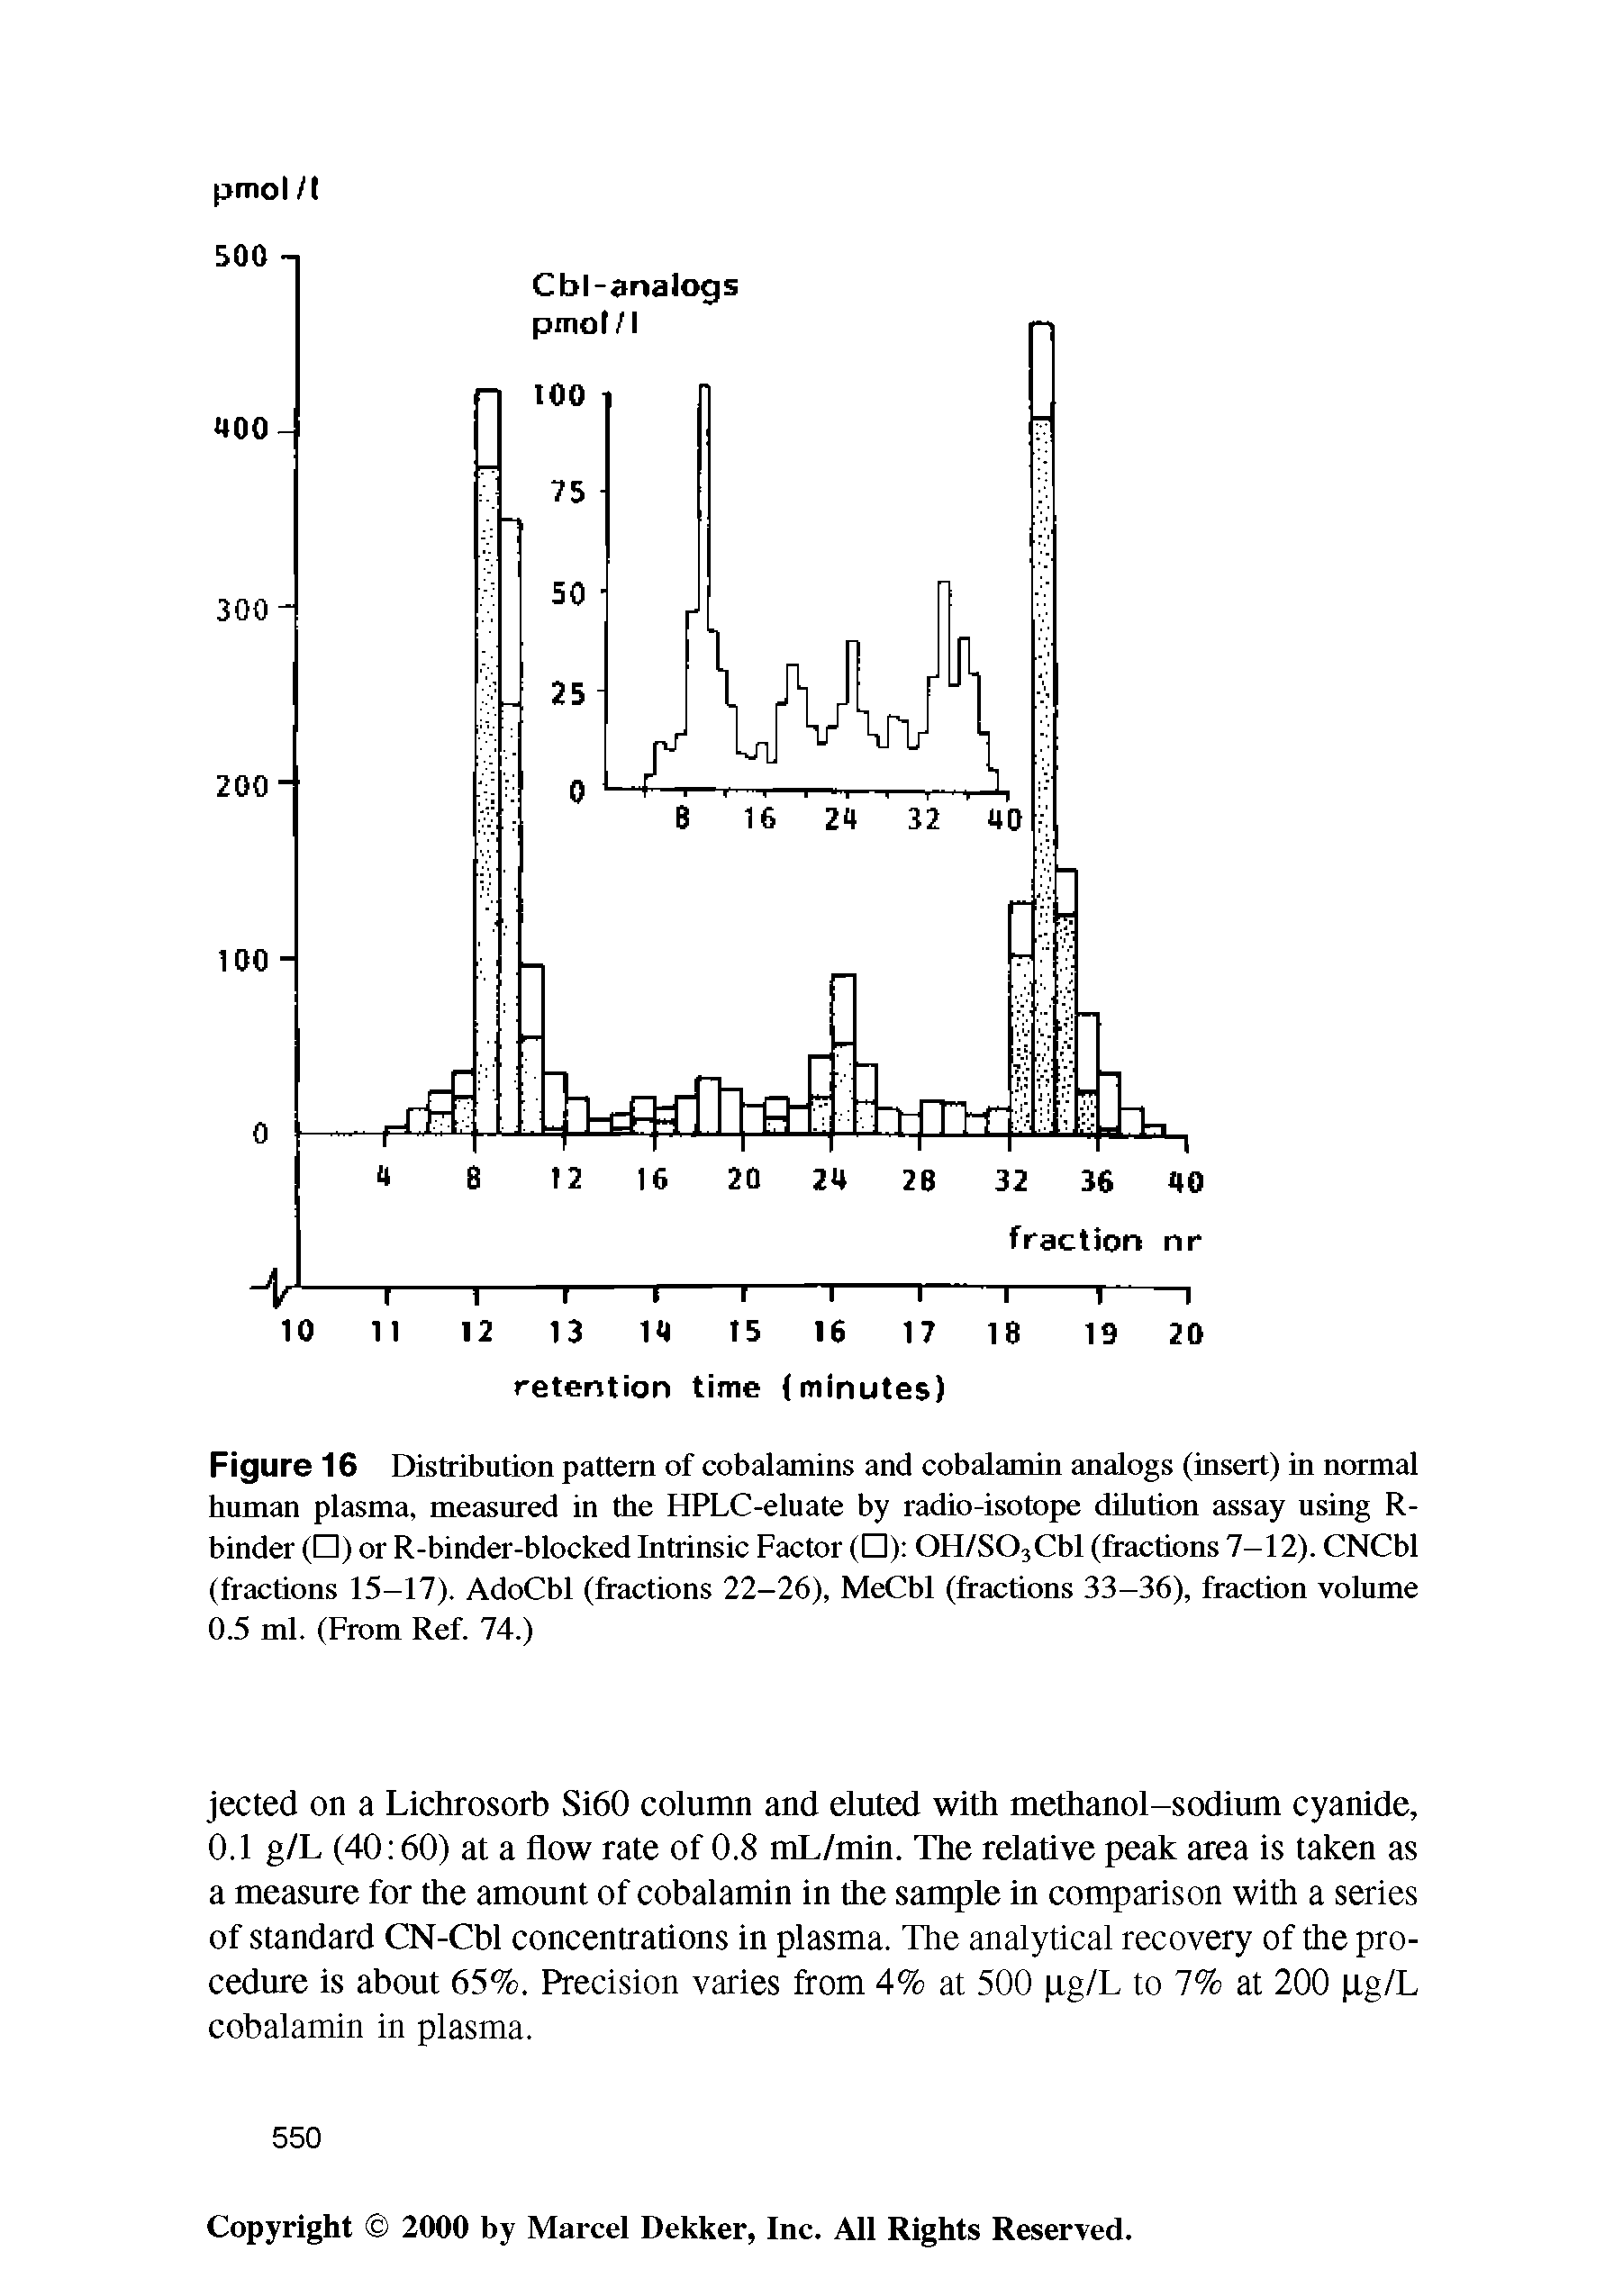 Figure 16 Distribution pattern of cobalamins and cobalamin analogs (insert) in normal human plasma, measured in the HPLC-eluate by radio-isotope dilution assay using R-binder ( ) or R-binder-blocked Intrinsic Factor ( ) OH/SOjCbl (fractions 7-12). CNCbl (fractions 15-17). AdoCbl (fractions 22-26), MeCbl (fractions 33-36), fraction volume 0.5 ml. (From Ref. 74.)...